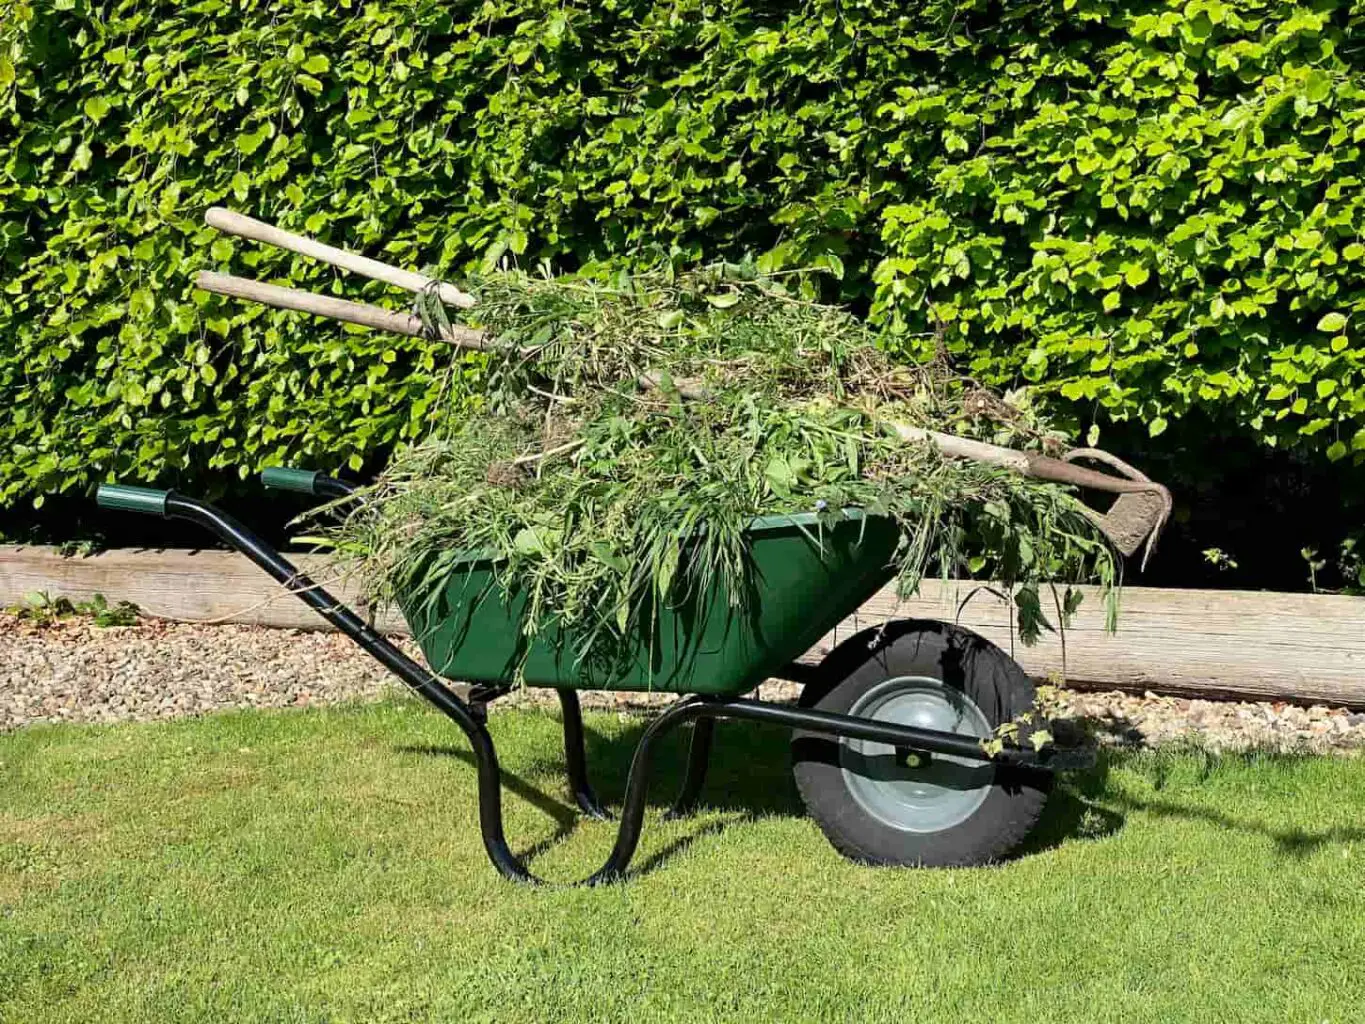 An image of a wheelbarrow full of weeds for the compost heap.